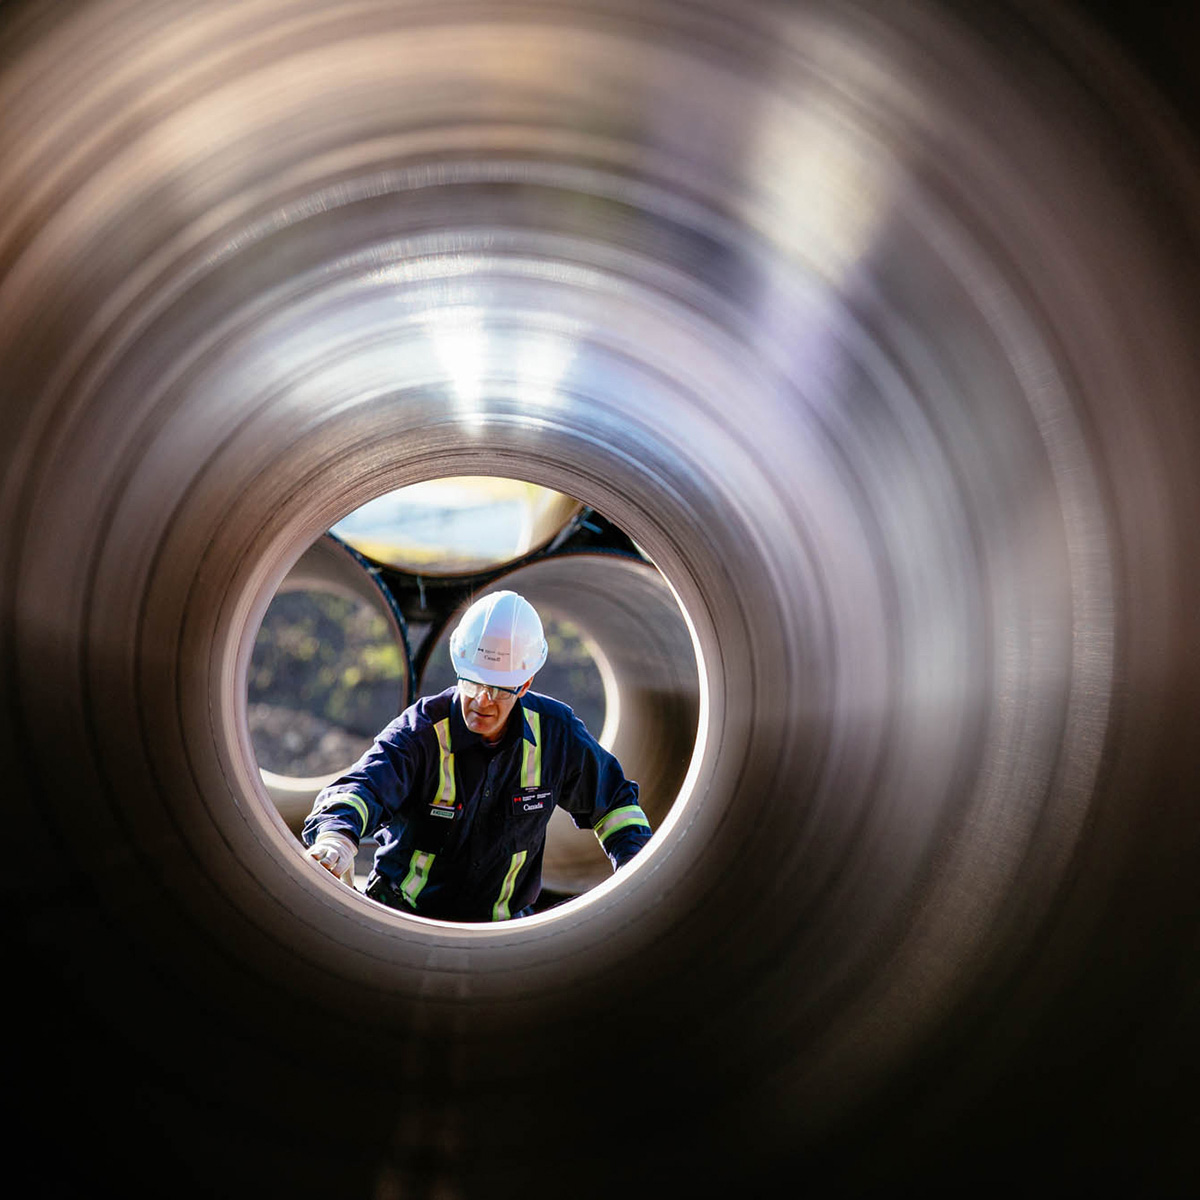 Person wearing personal protective equipment inspecting the inside of a large pipe.